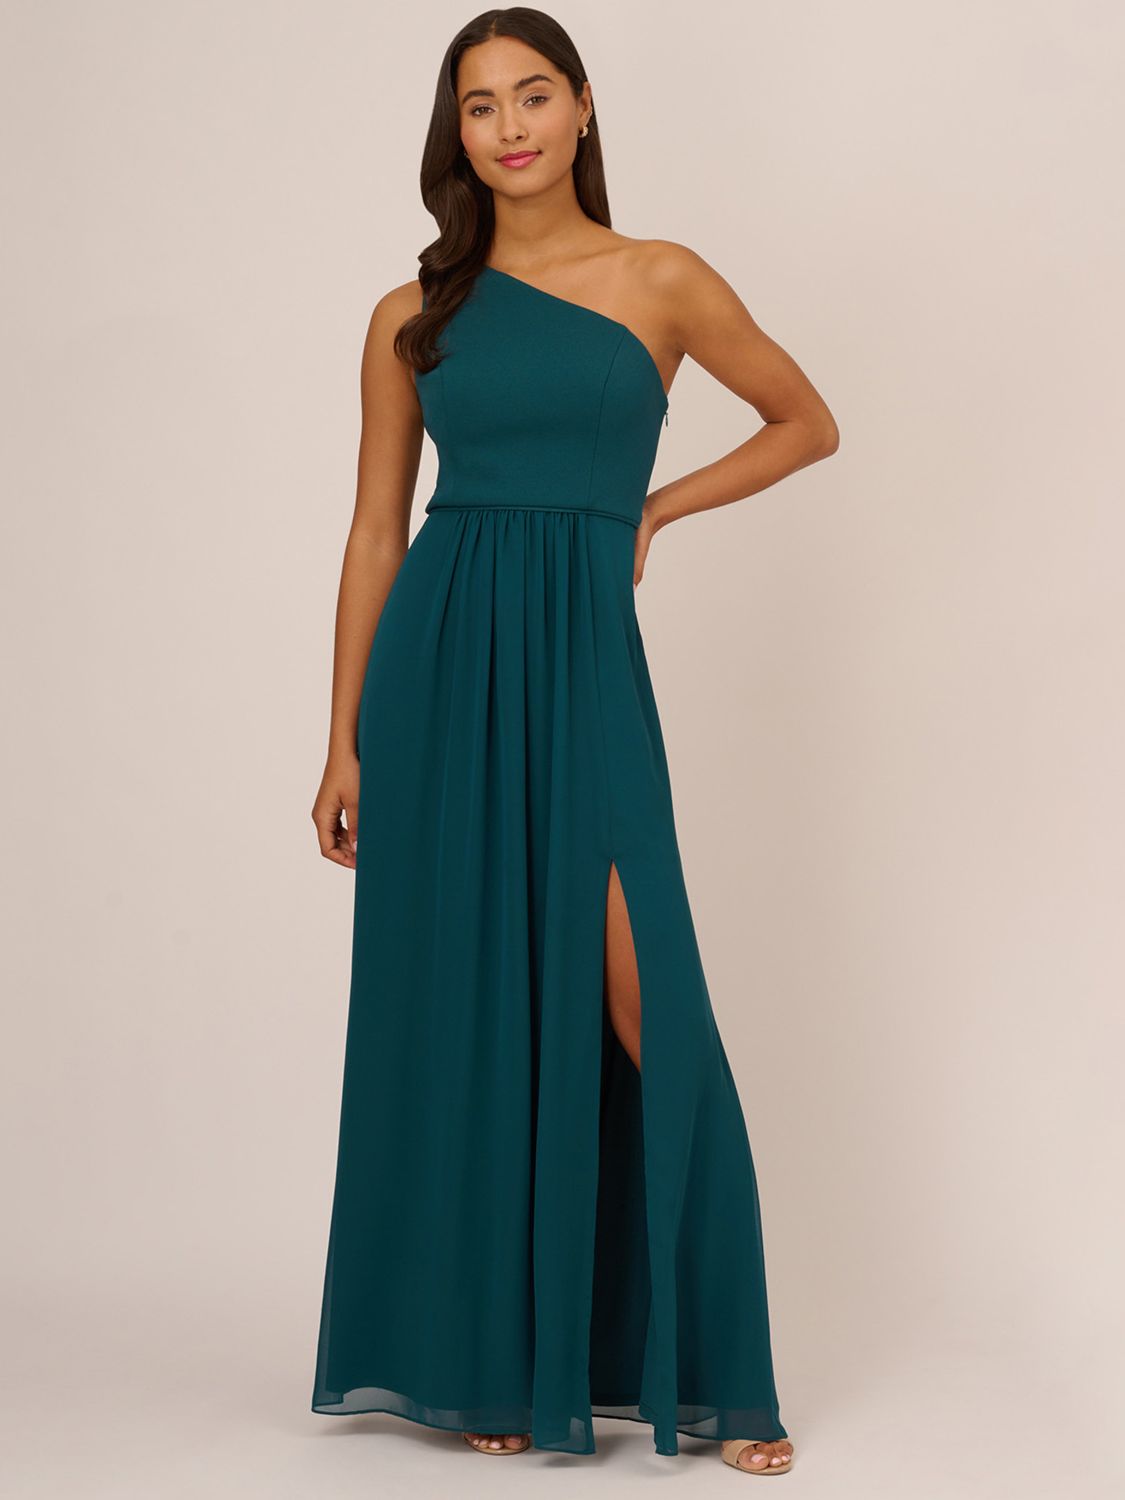 Adrianna Papell One Shoulder Chiffon Gown, Hunter, 6